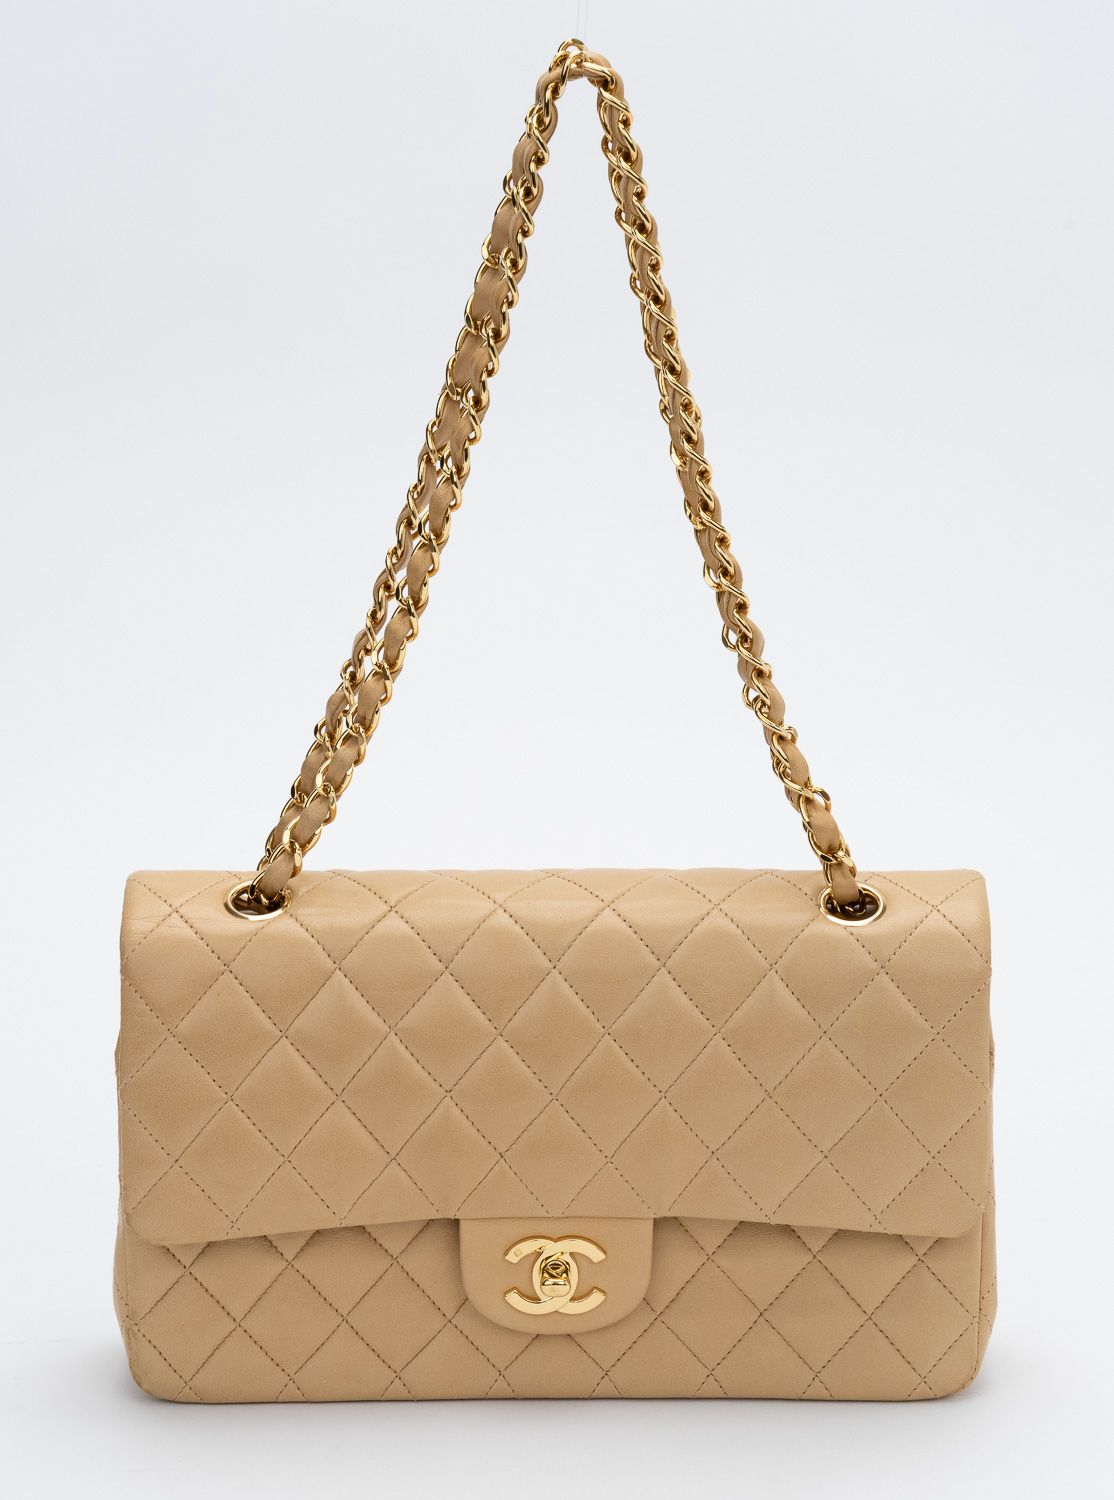 CHANEL Vintage Classic Double Flap Bag Quilted Lambskin Brown 25